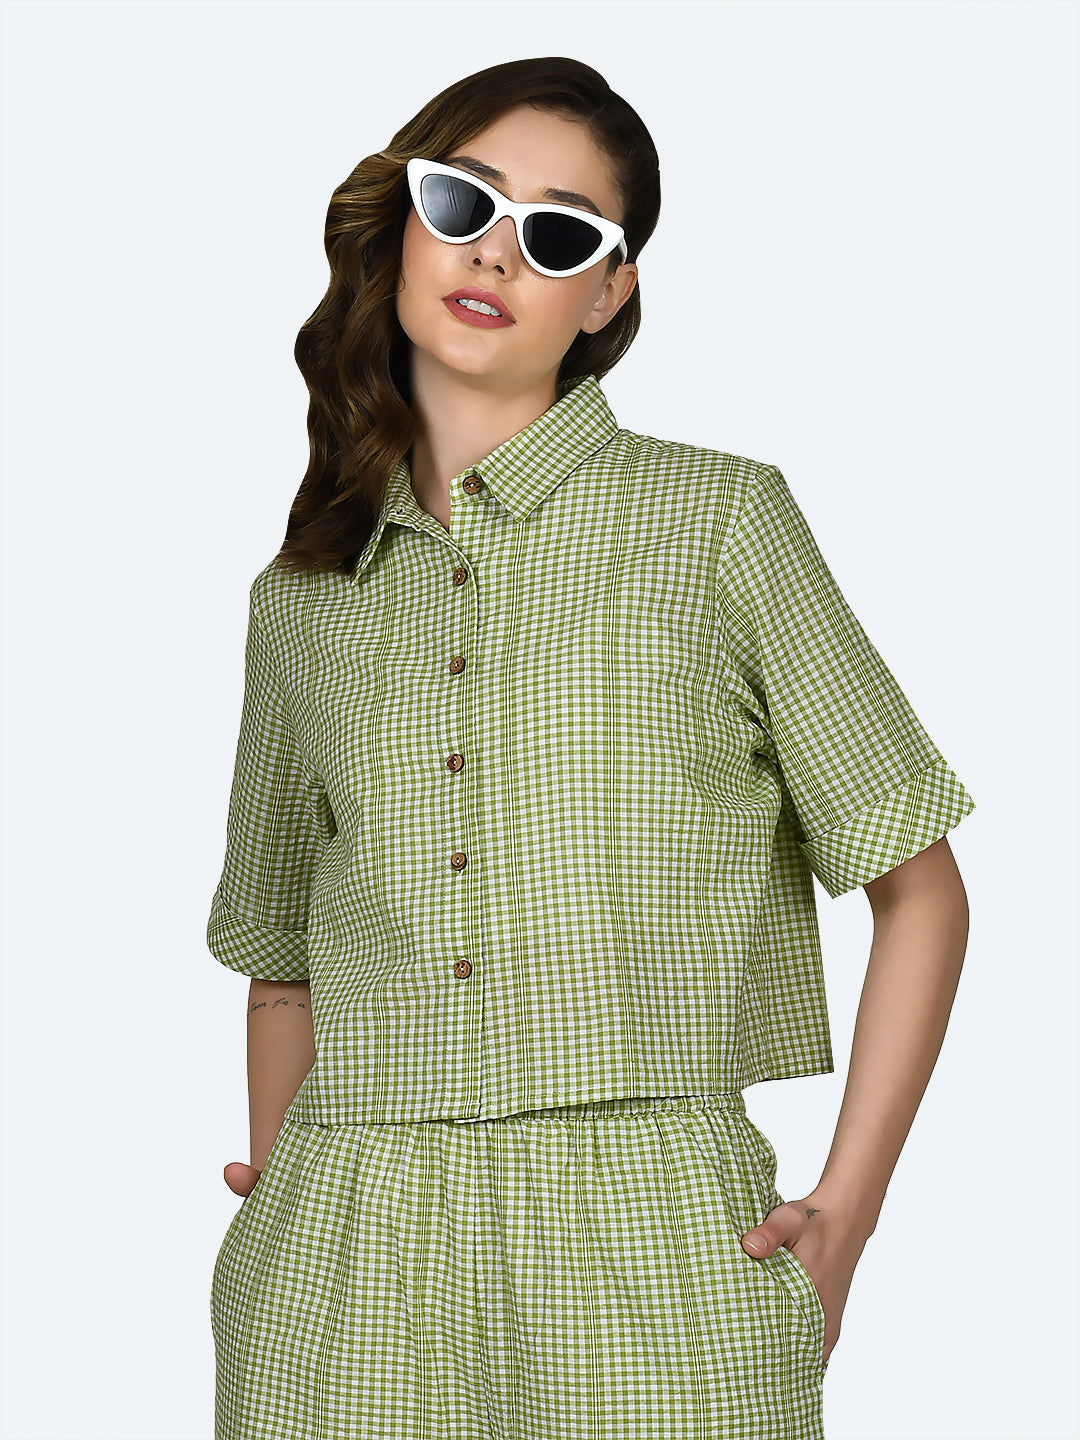 Multicolored Checked Buttoned Top For Women